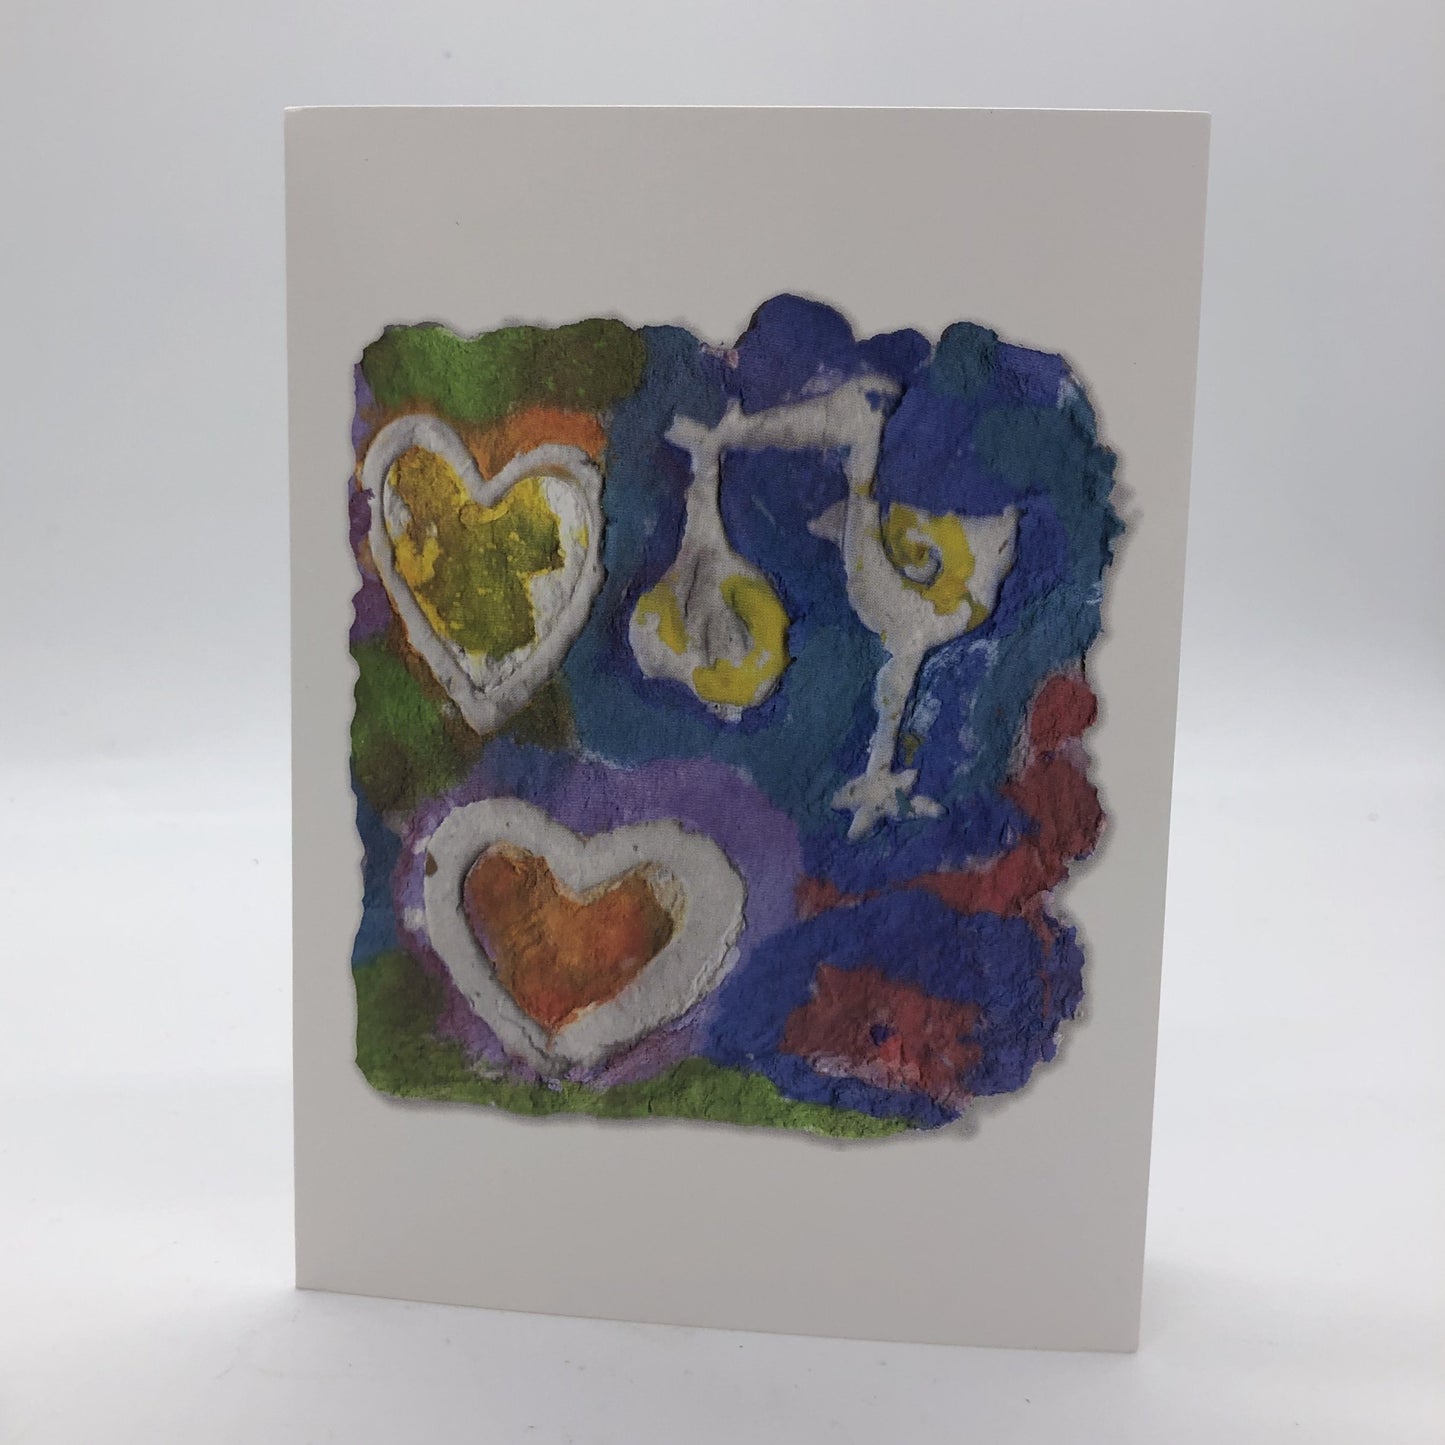 Printed card of photo of handmade paper in blues, greens and reds. On top of the design are two white hearts and a stork holding a wrapped baby by it's beak.